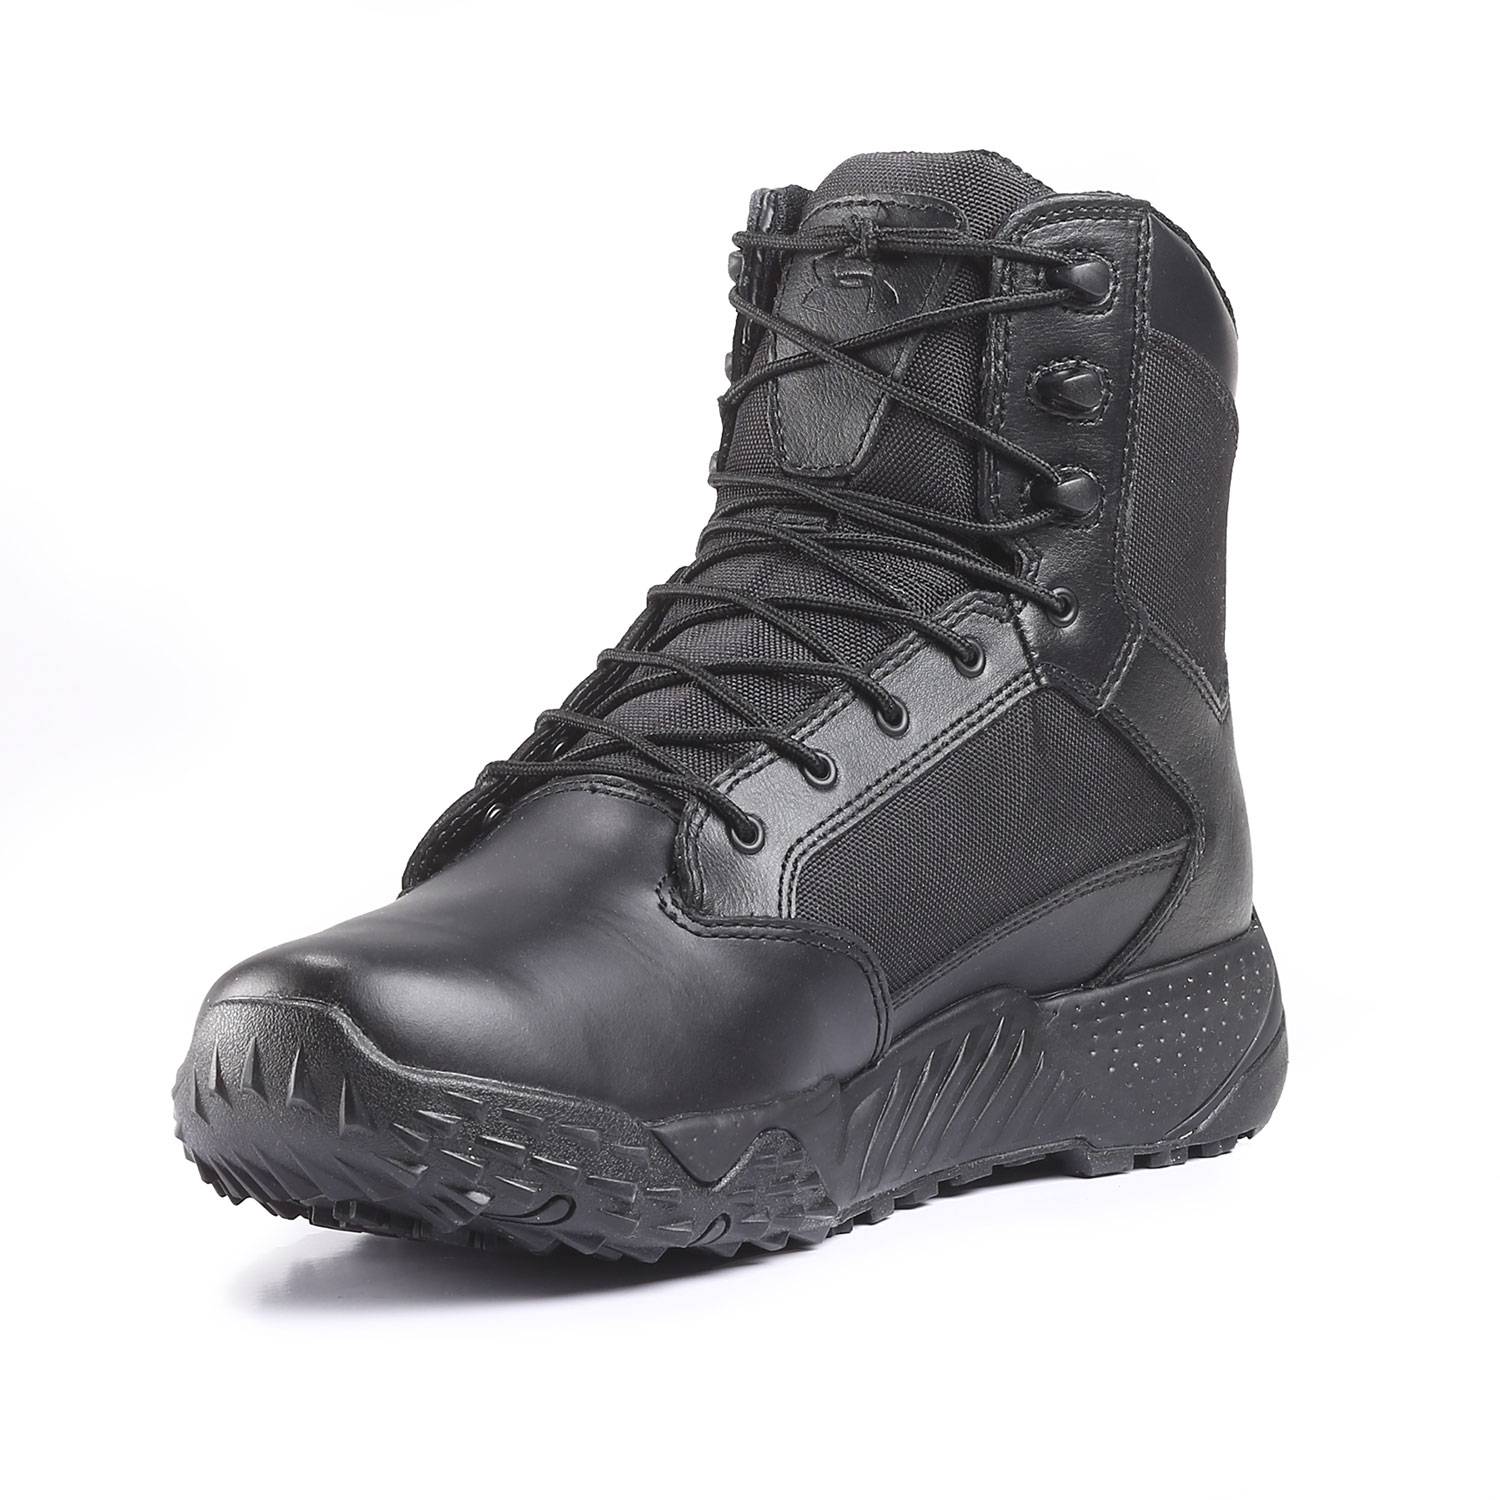 under armour men's stellar military and tactical boot